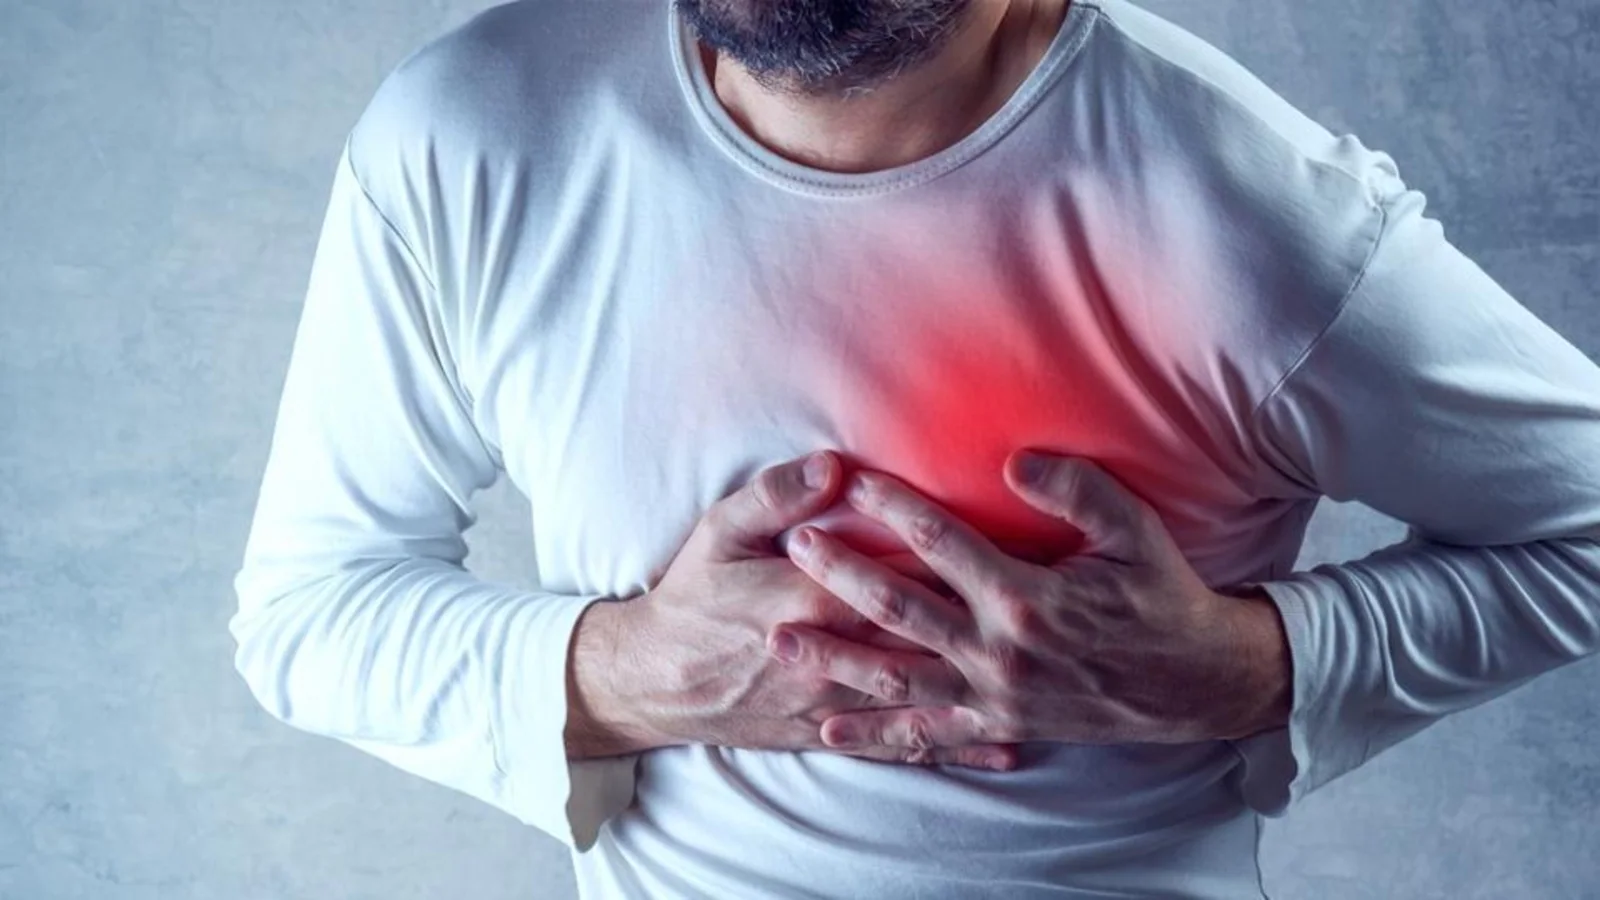 High cardiovascular risk closesly related to depression symptoms: Study